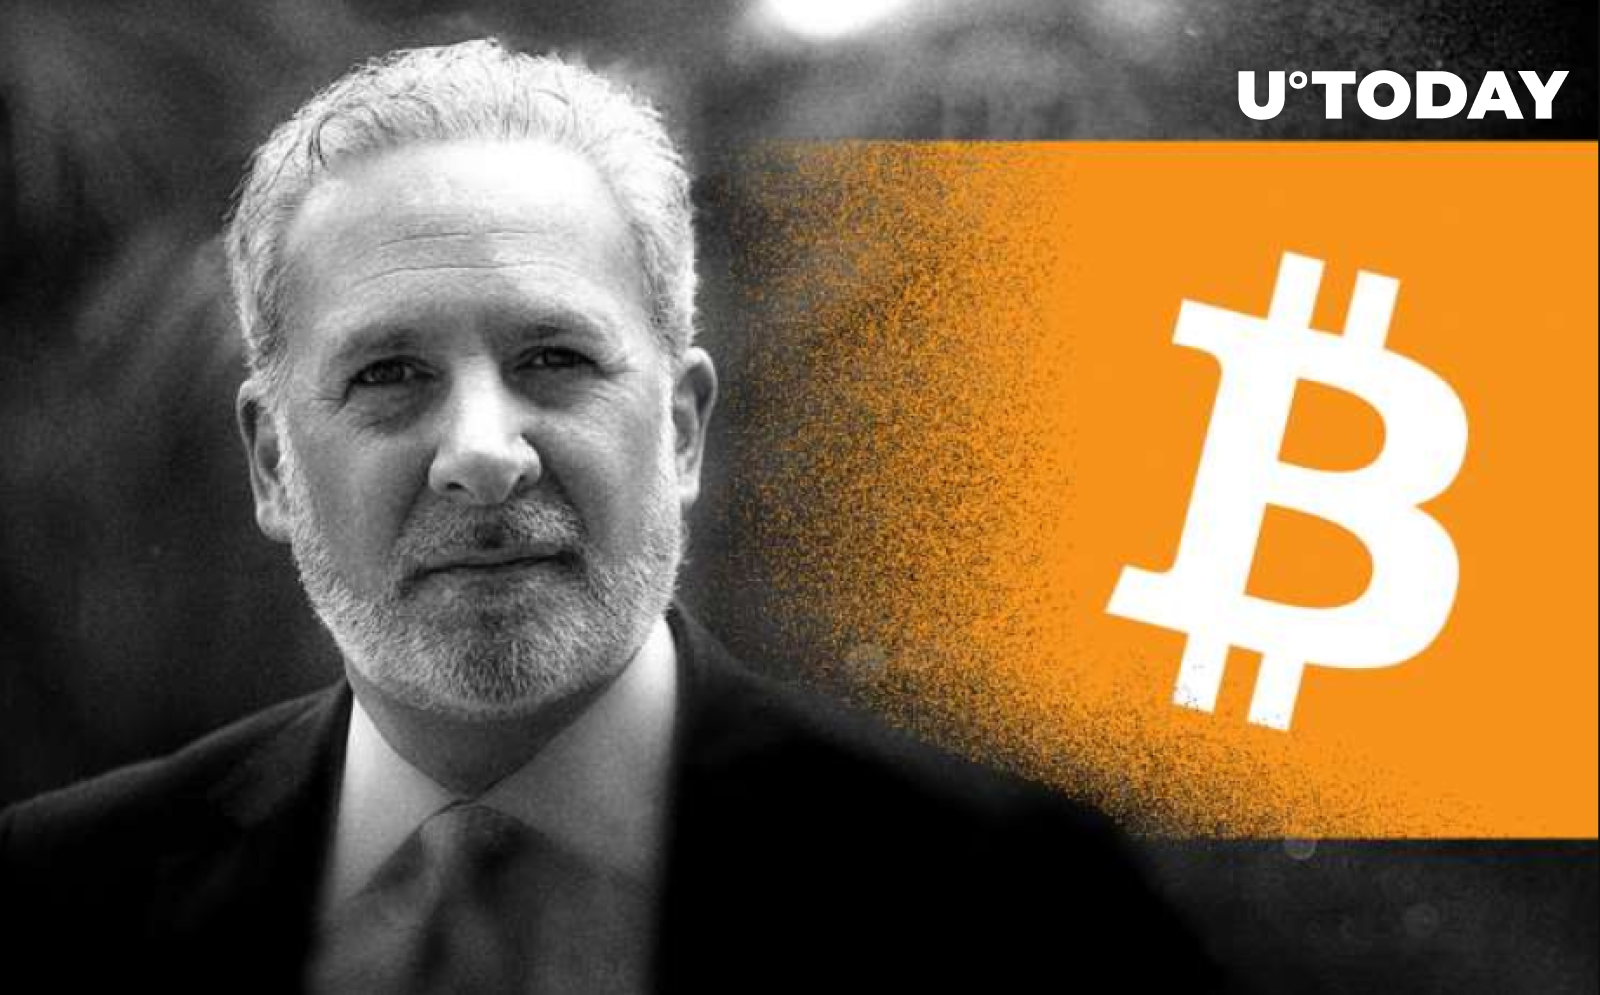 Peter Schiff Now Asking for Bitcoin on Twitter